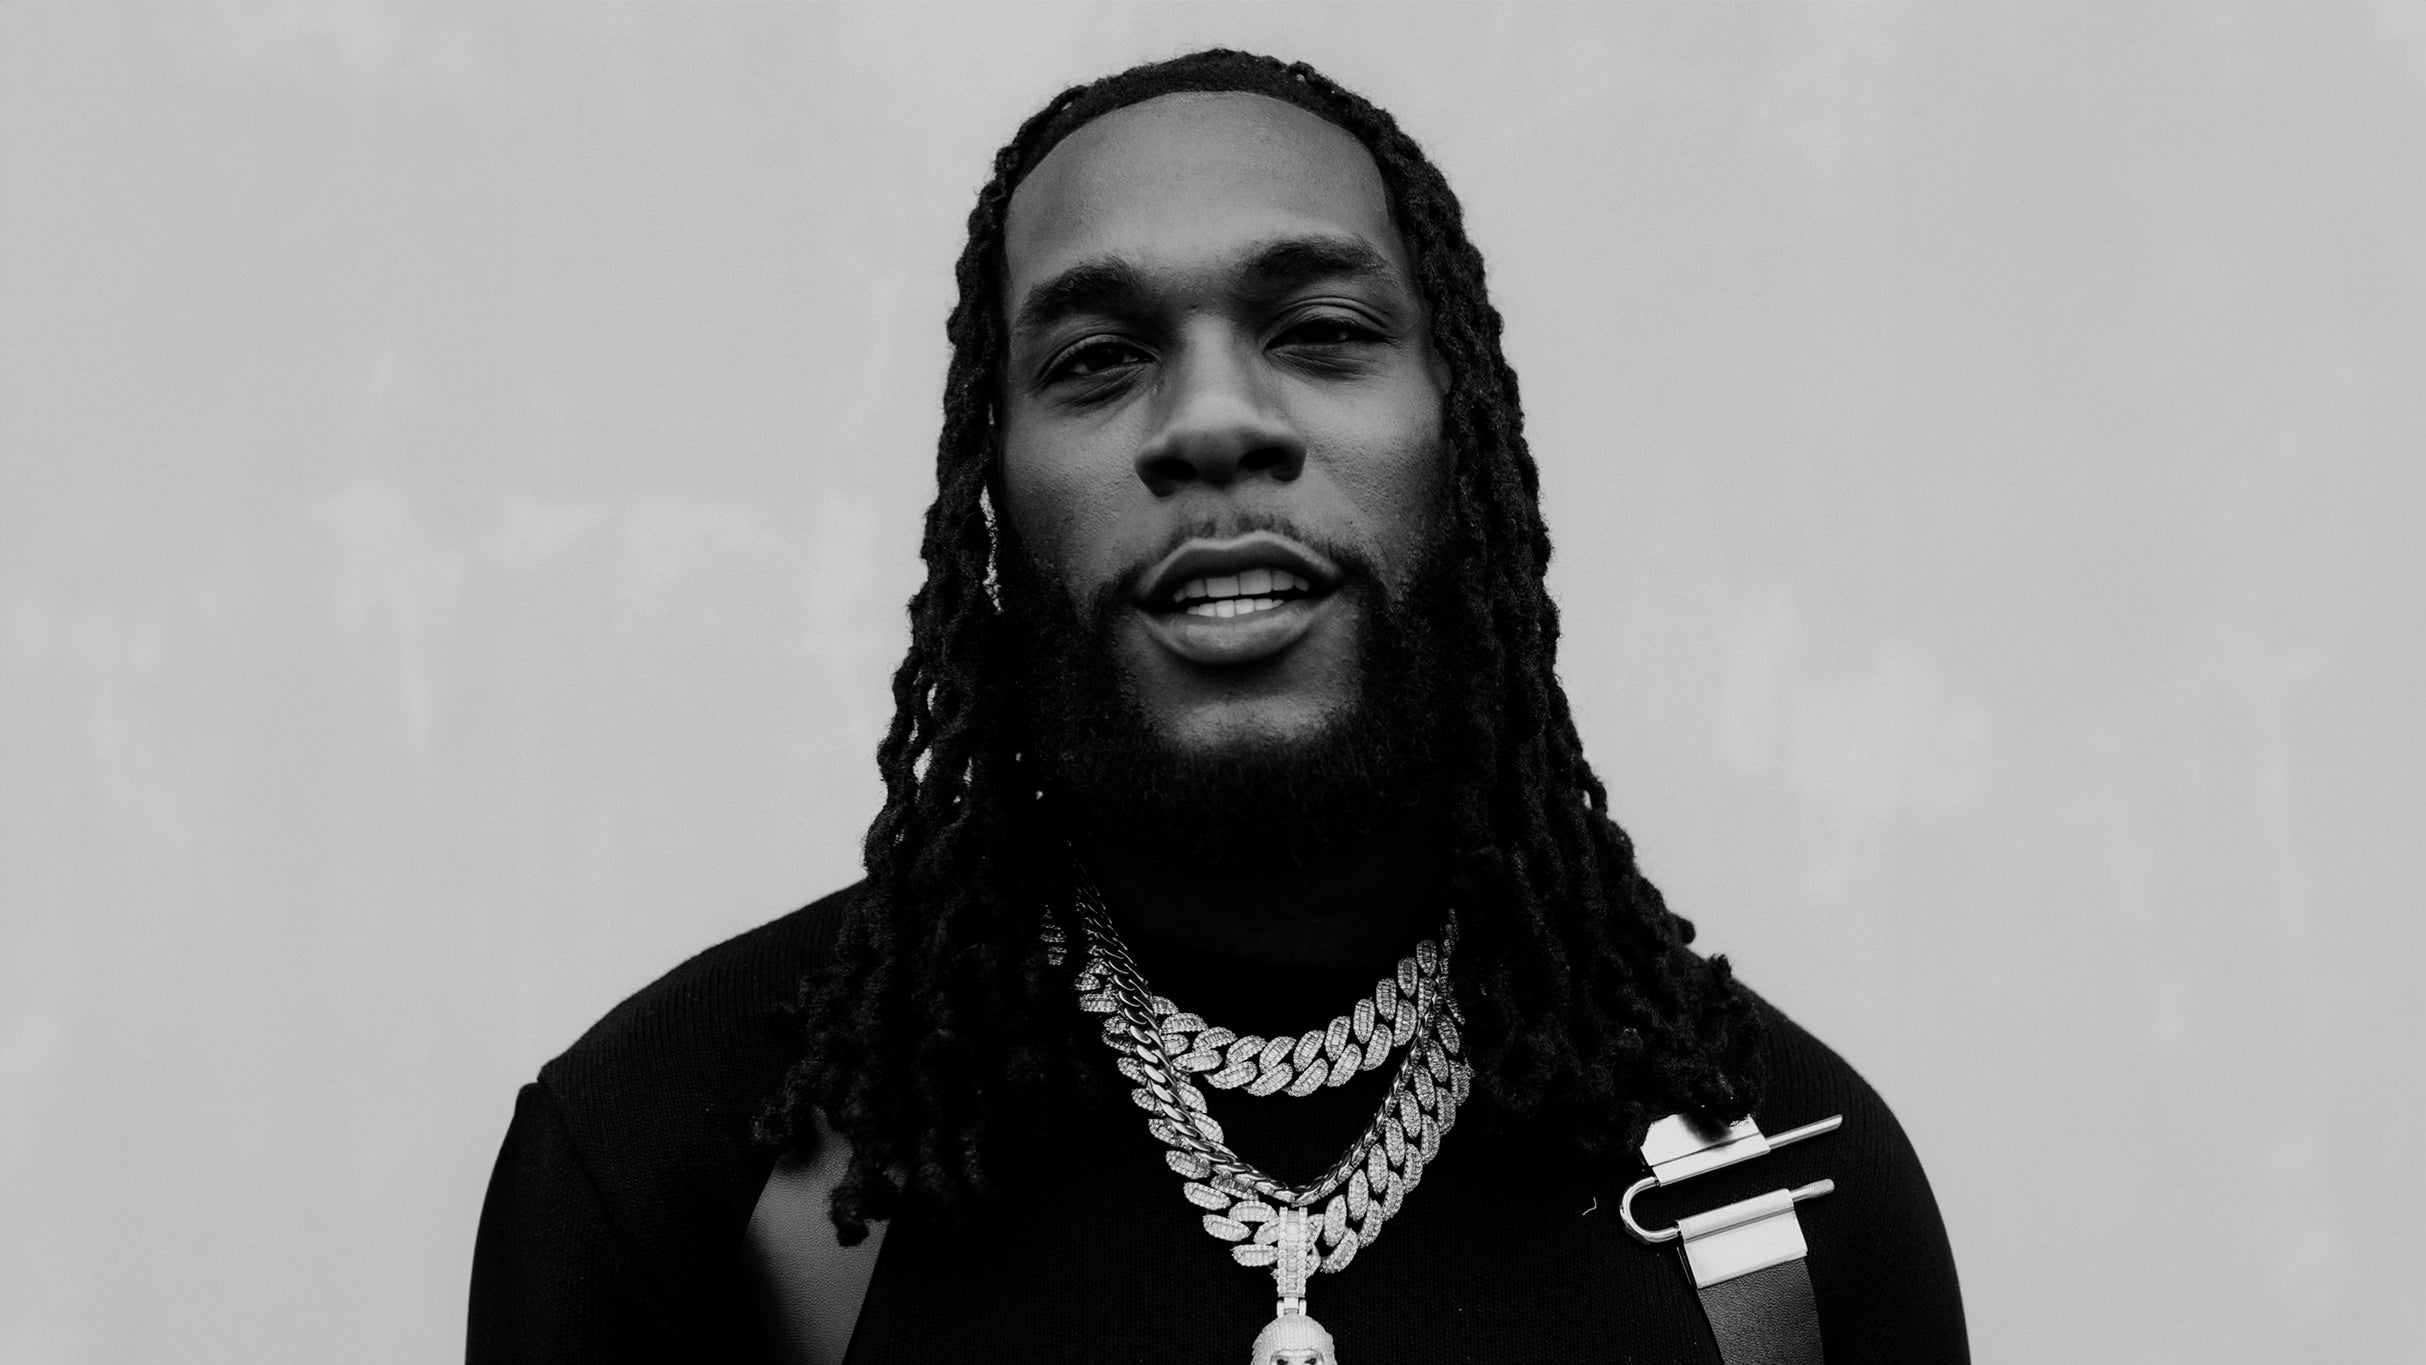 Burna Boy: I Told Them Tour free presale pa55w0rd for early tickets in Atlanta